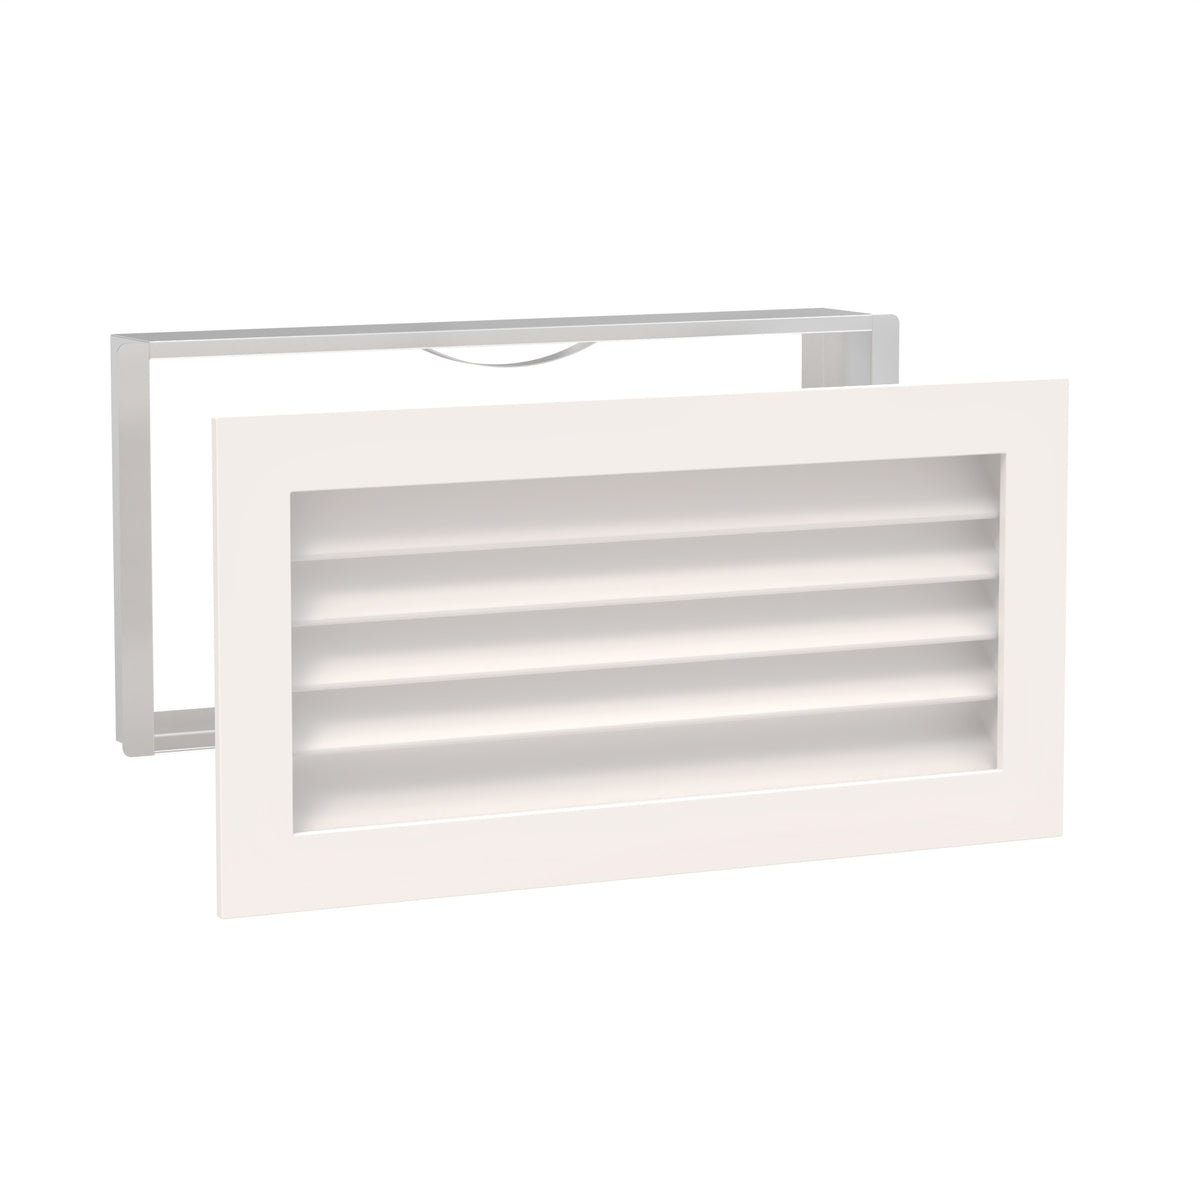 Worth Home Products - decorative wood AC vent covers luxury return vent - Primed Wood Louvers 24x12